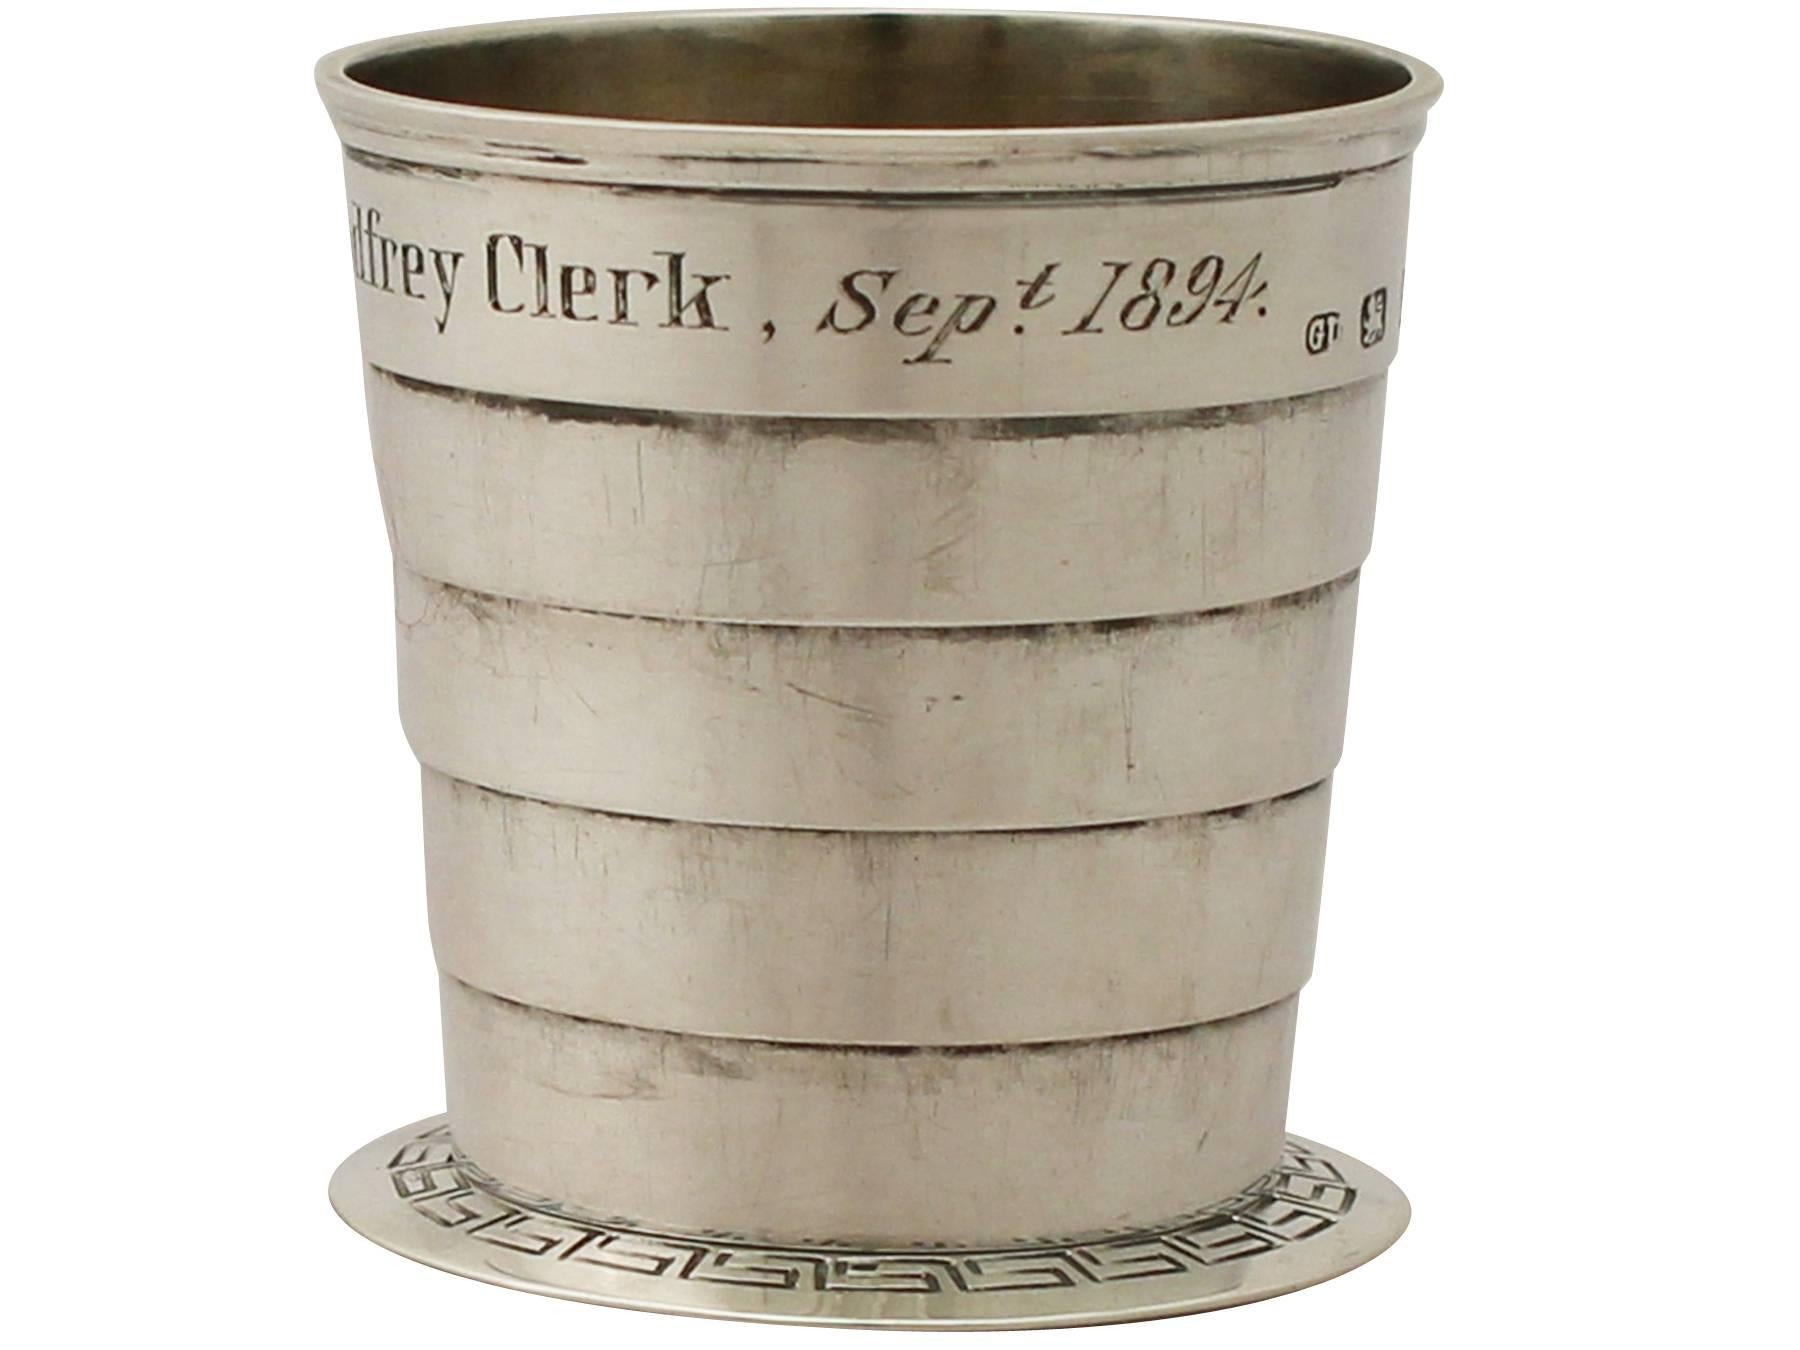 A fine and impressive antique Victorian English sterling silver collapsible beaker; an addition to our ornamental silverware collection.

This impressive antique Victorian sterling silver travelling collapsible beaker has a circular tapering form